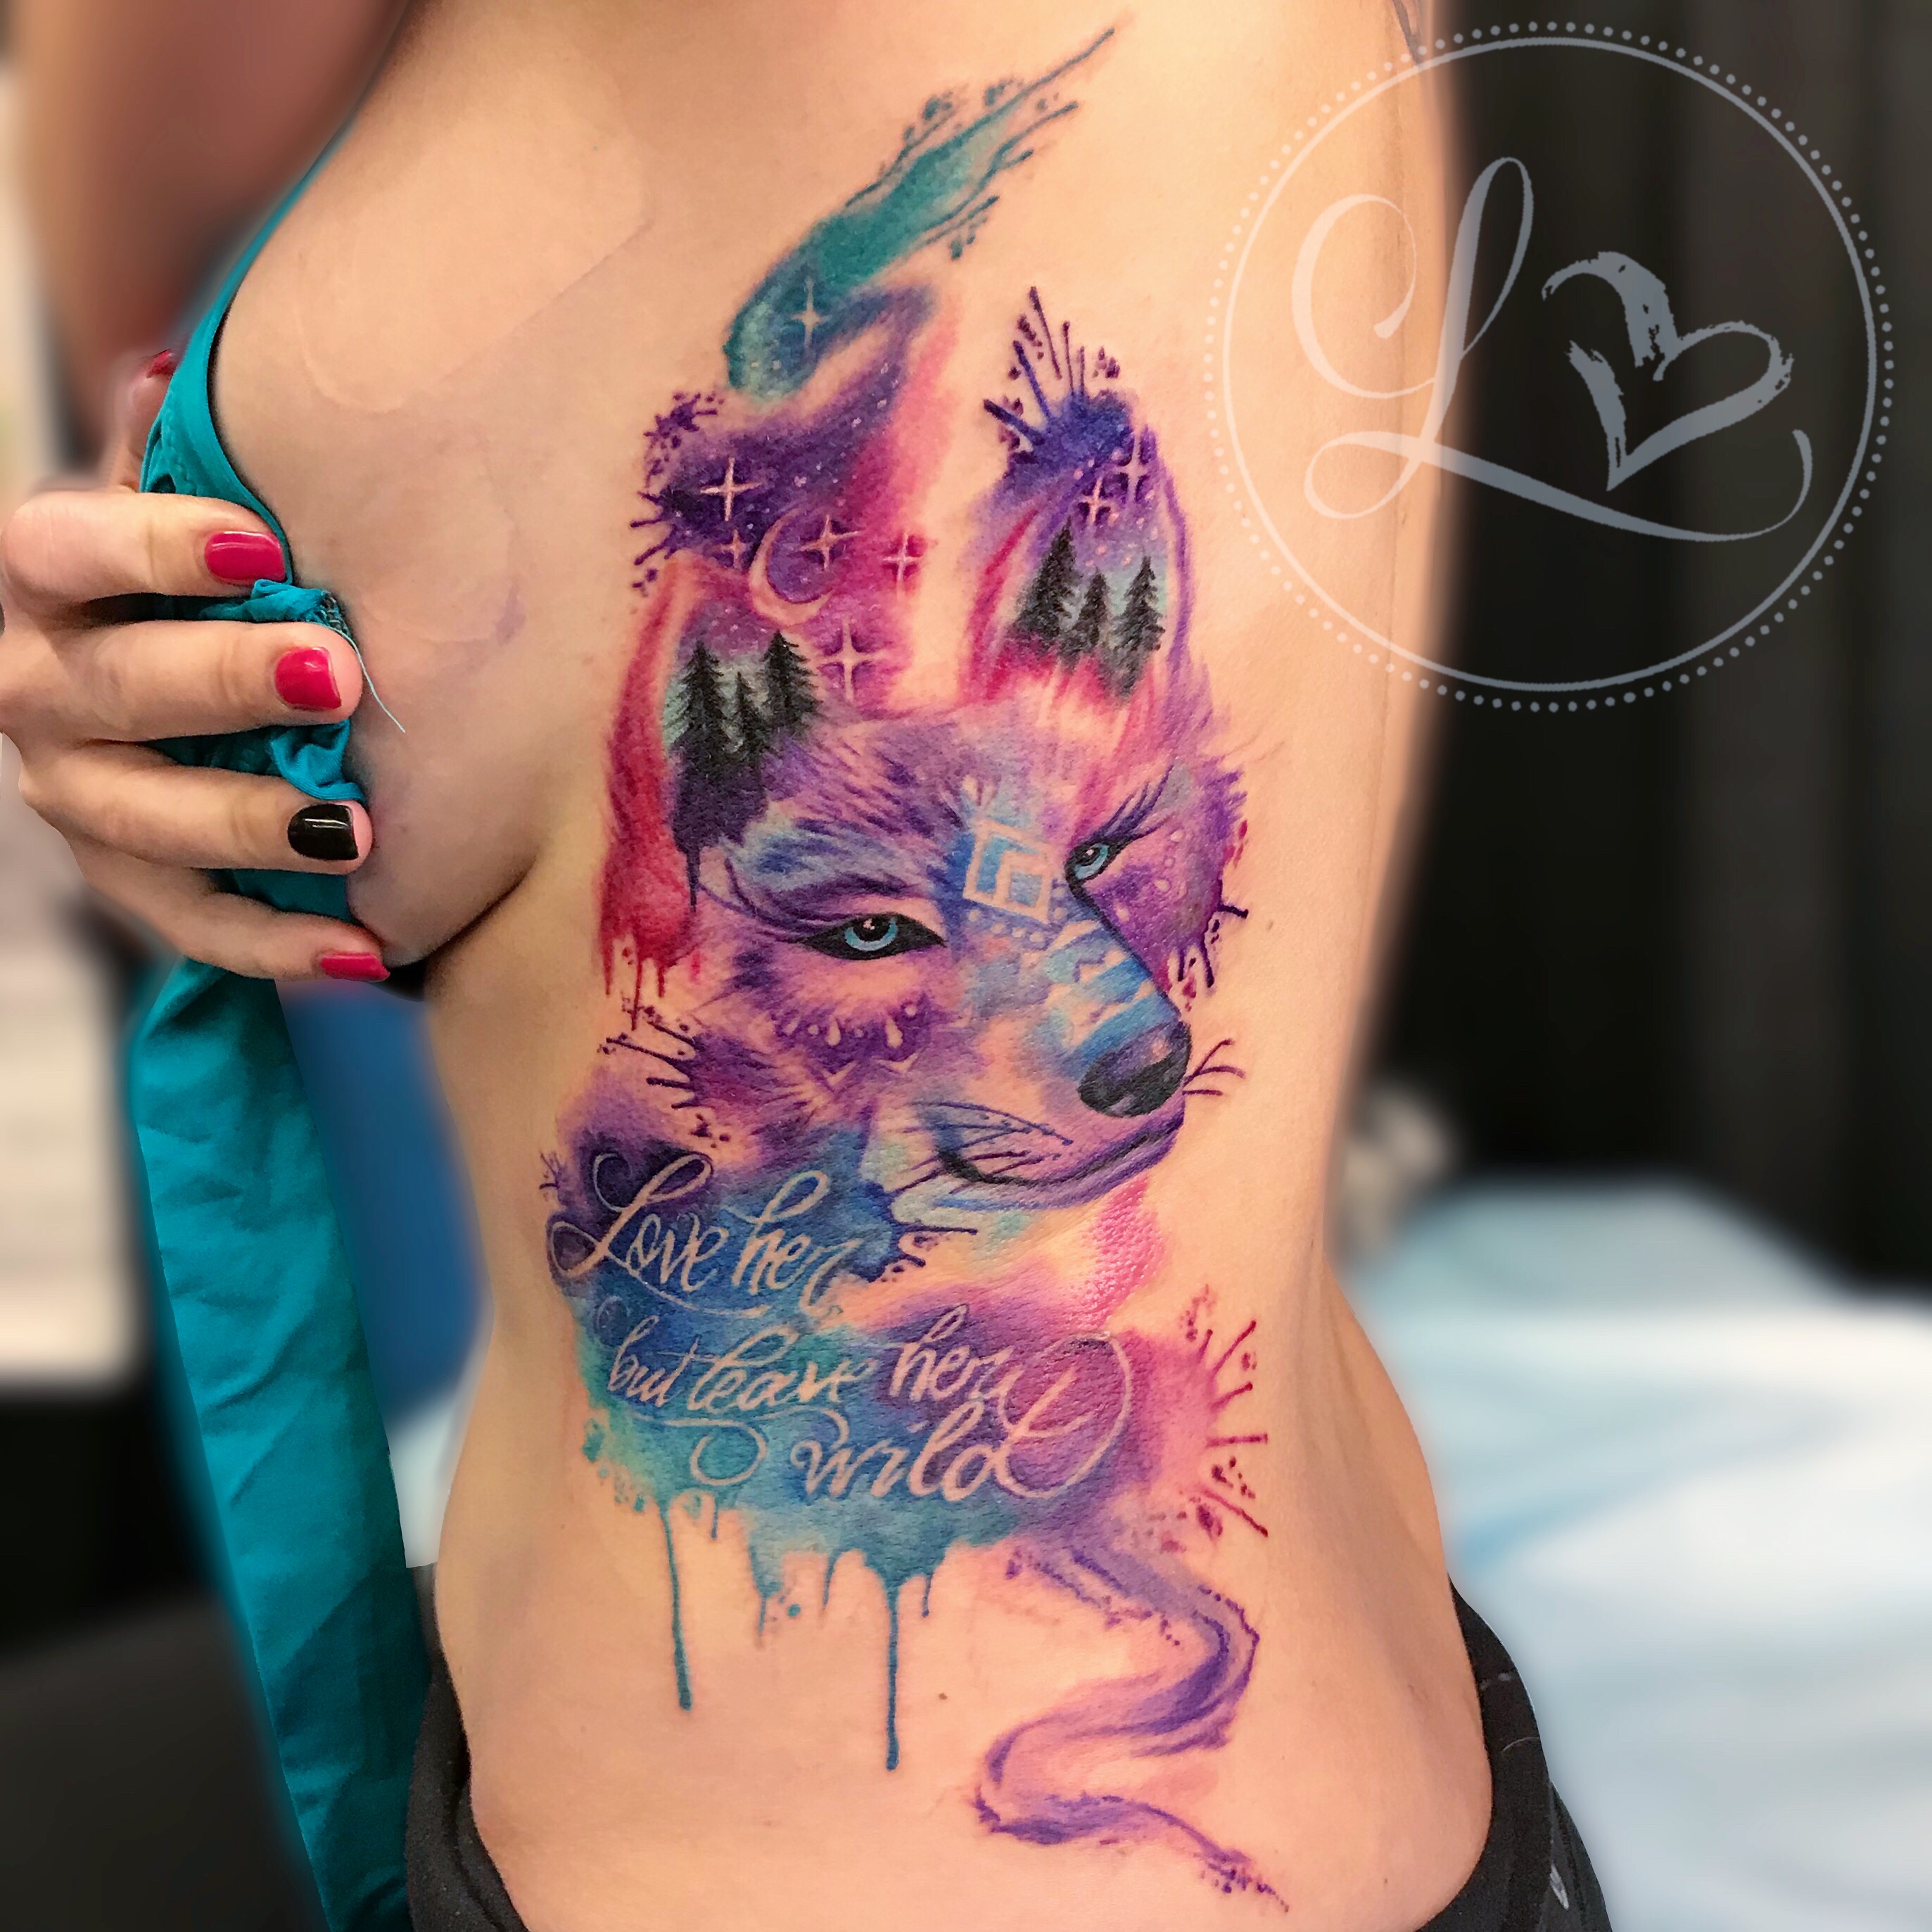 Colorful watercolor style ribcage side tattoo of a wolf and lettering